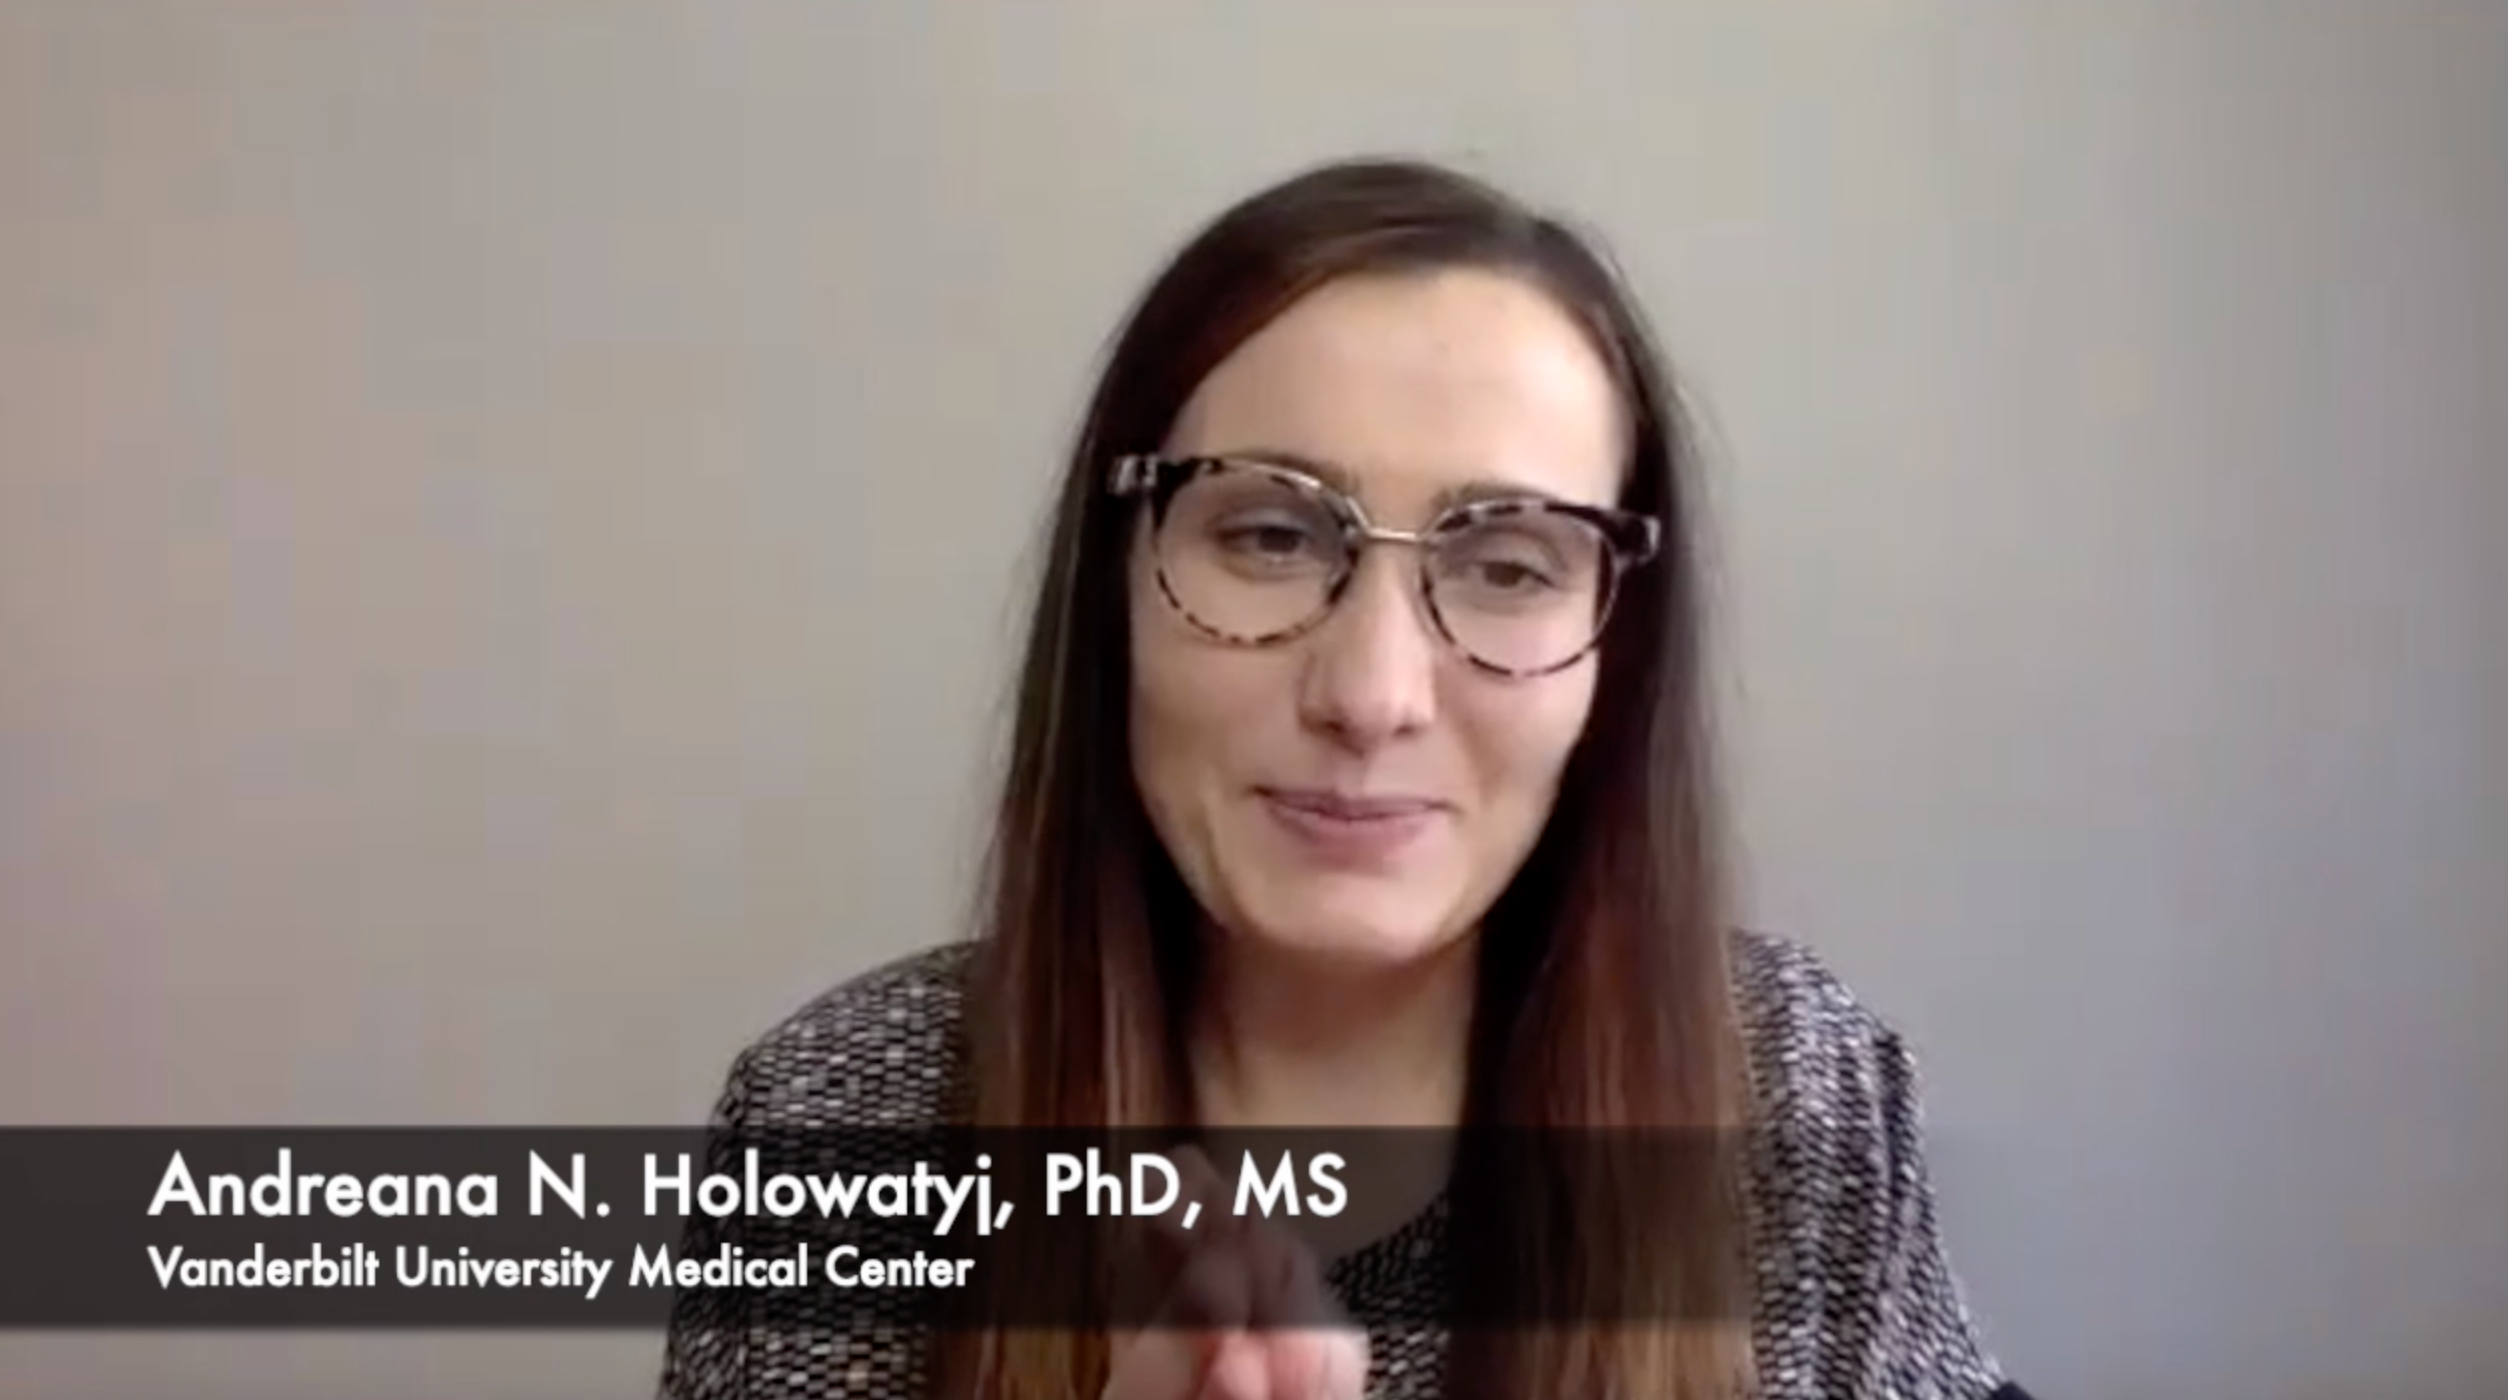 Andreana N. Holowatyj, PhD, MS, Talks AACR and the Value of the Annual Meeting 2021